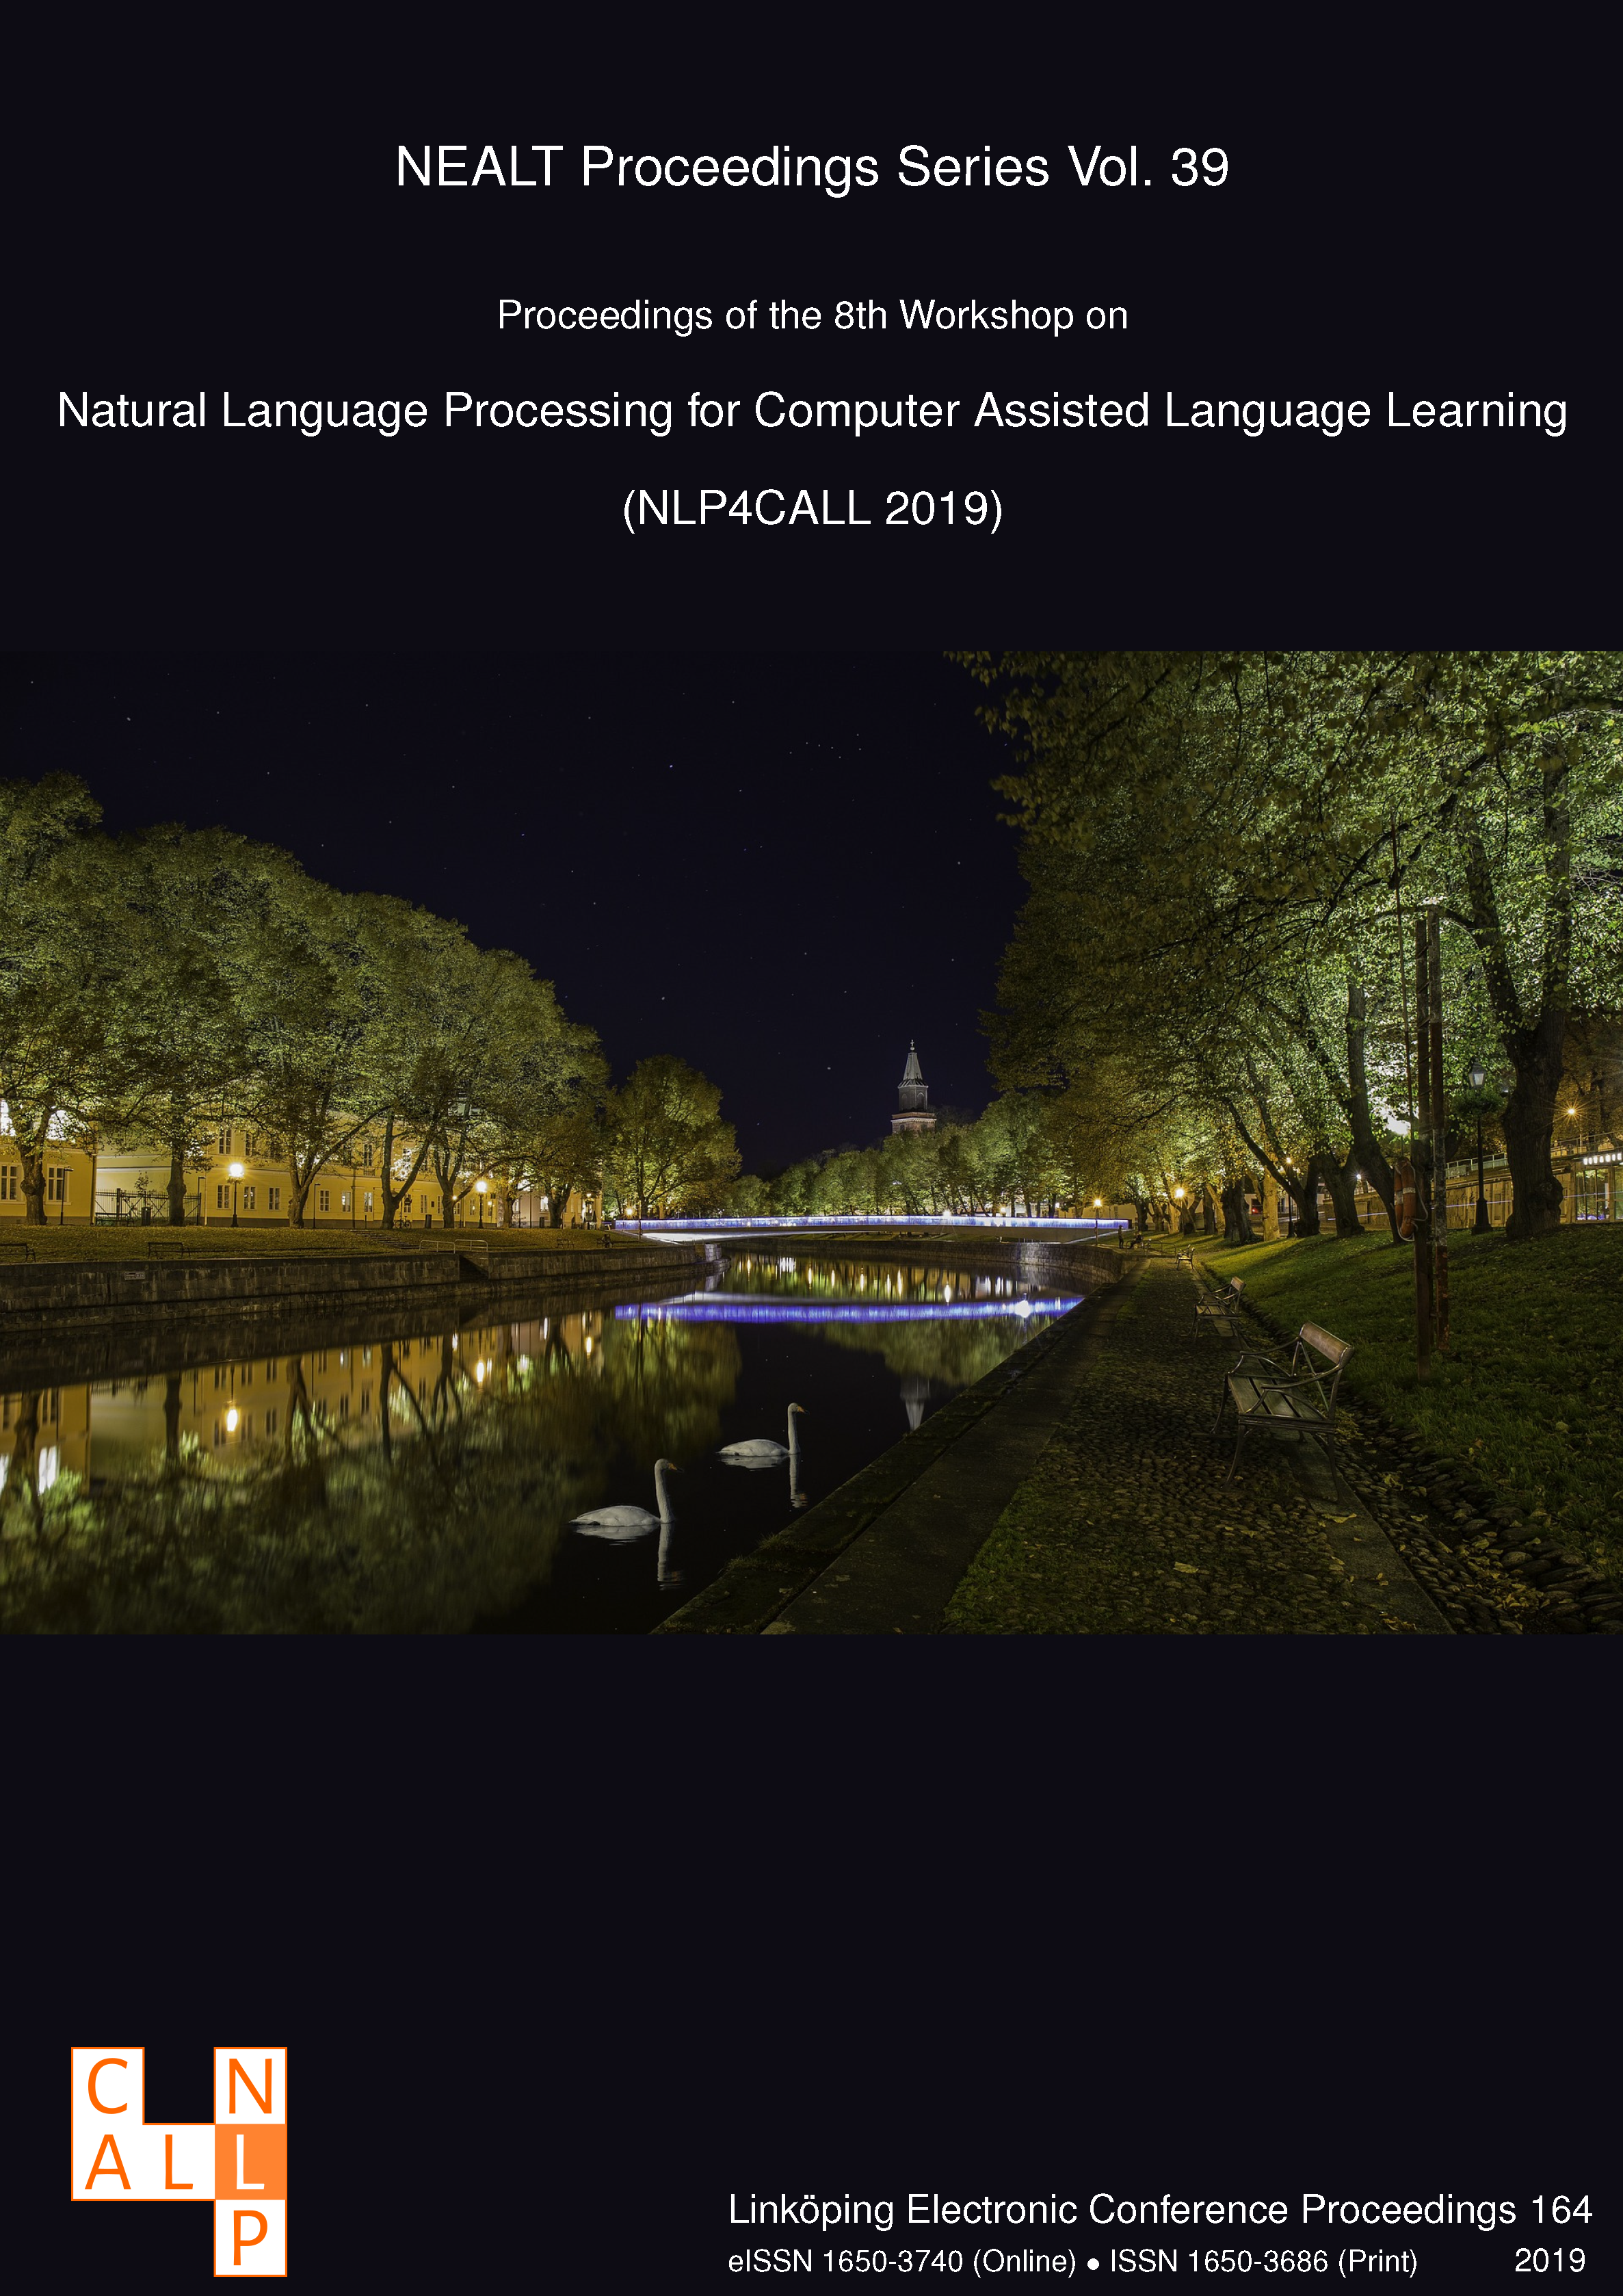 					View Proceedings of the 8th Workshop on Natural Language Processing for Computer Assisted Language Learning (NLP4CALL 2019), September 30, Turku Finland
				